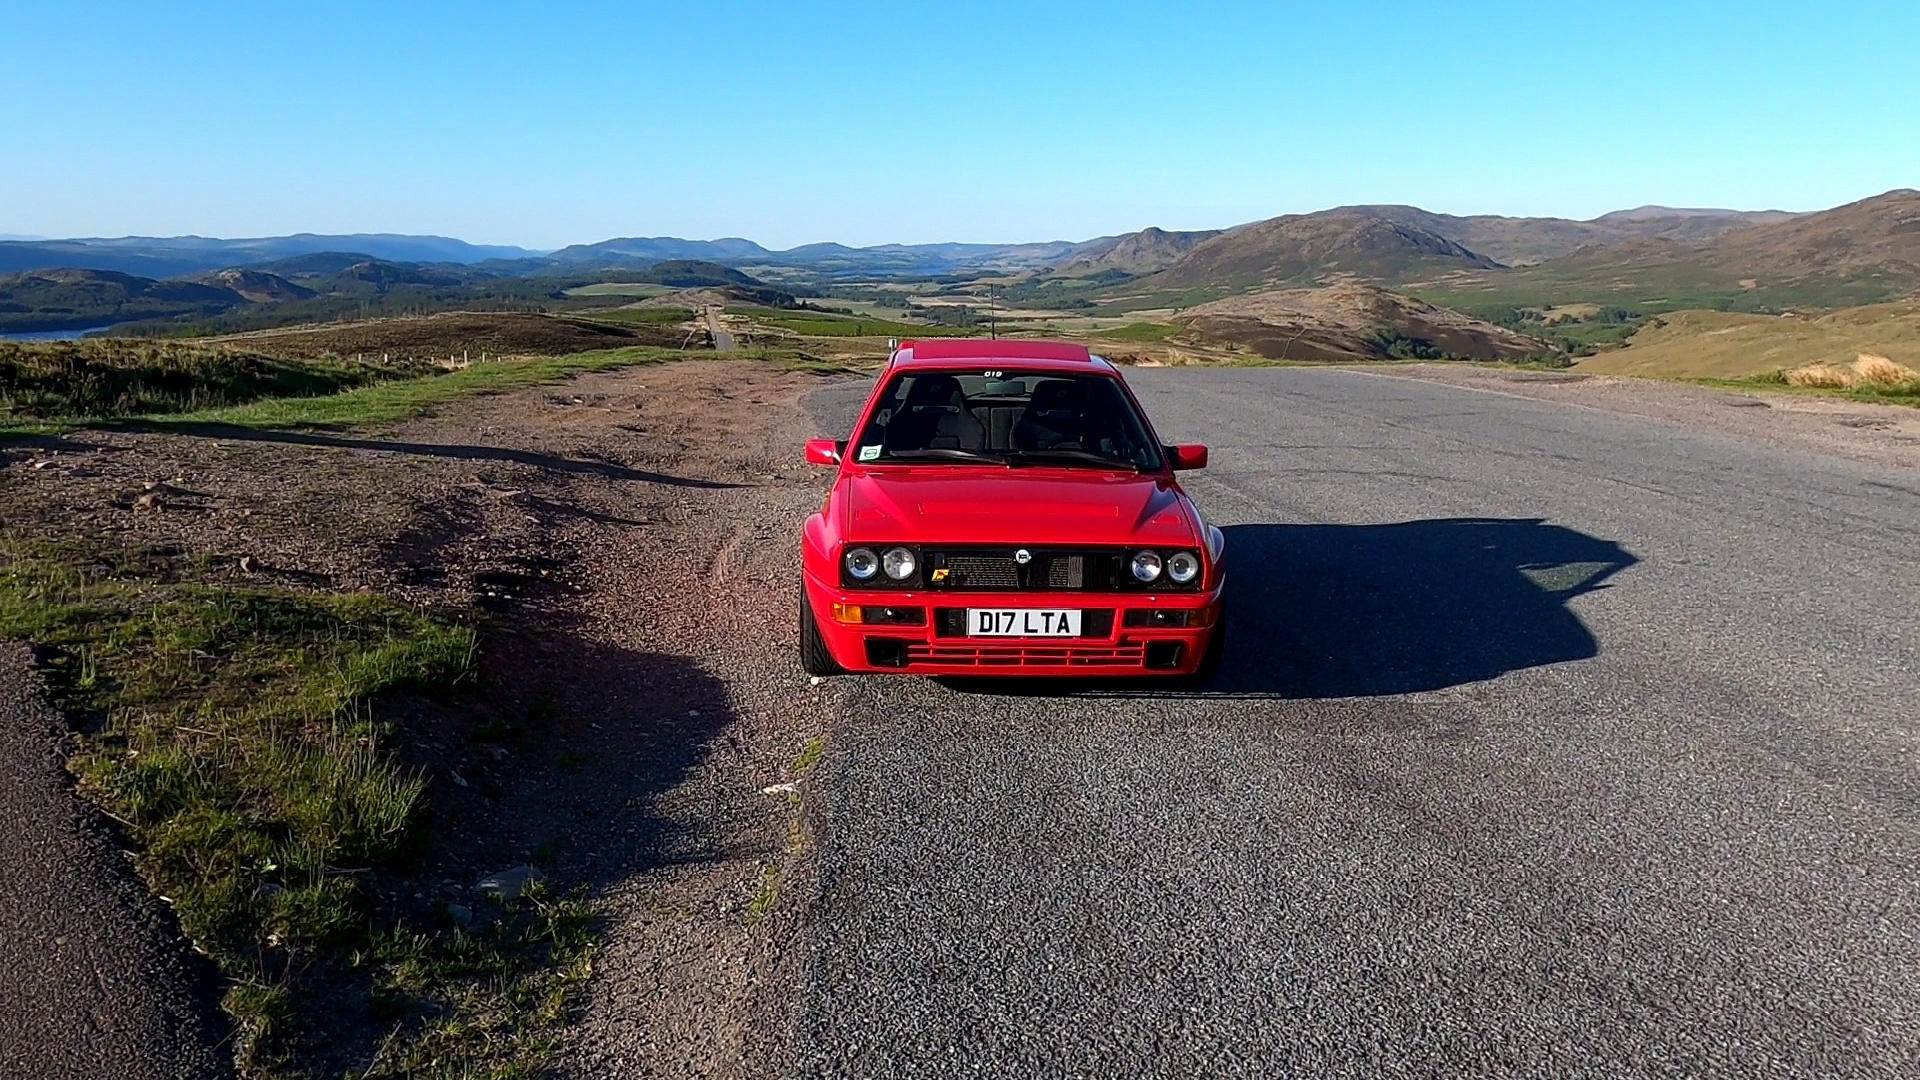 Lancia Delta integrale - Page 1 - Classic Cars and Yesterday's Heroes - PistonHeads